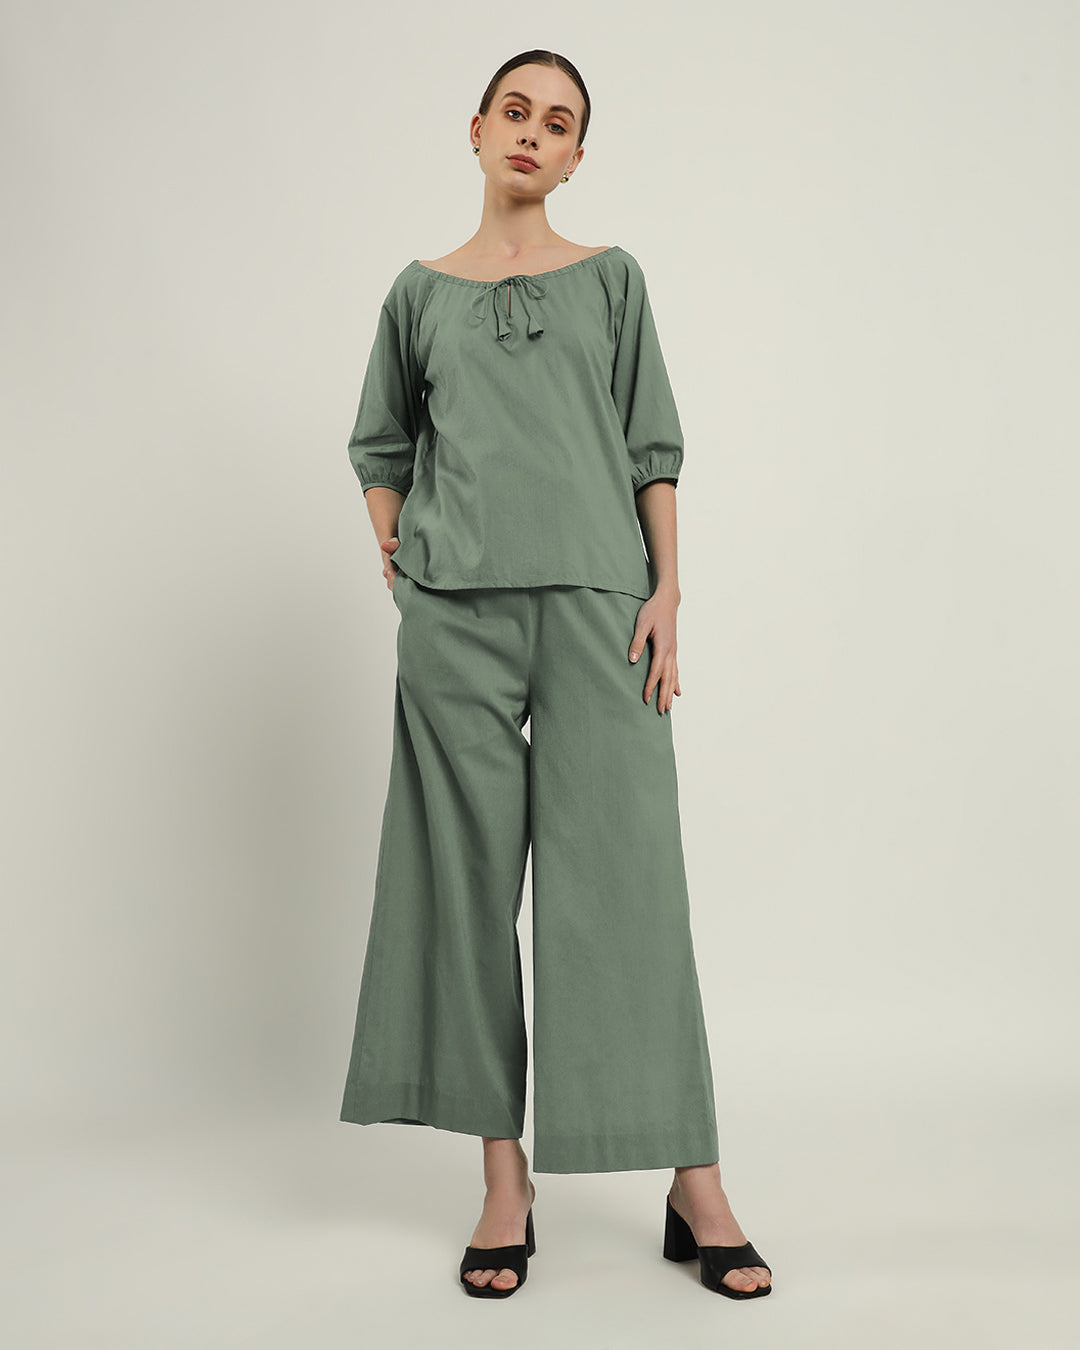 Mint Effortless BowtNeck Top (Without Bottoms)